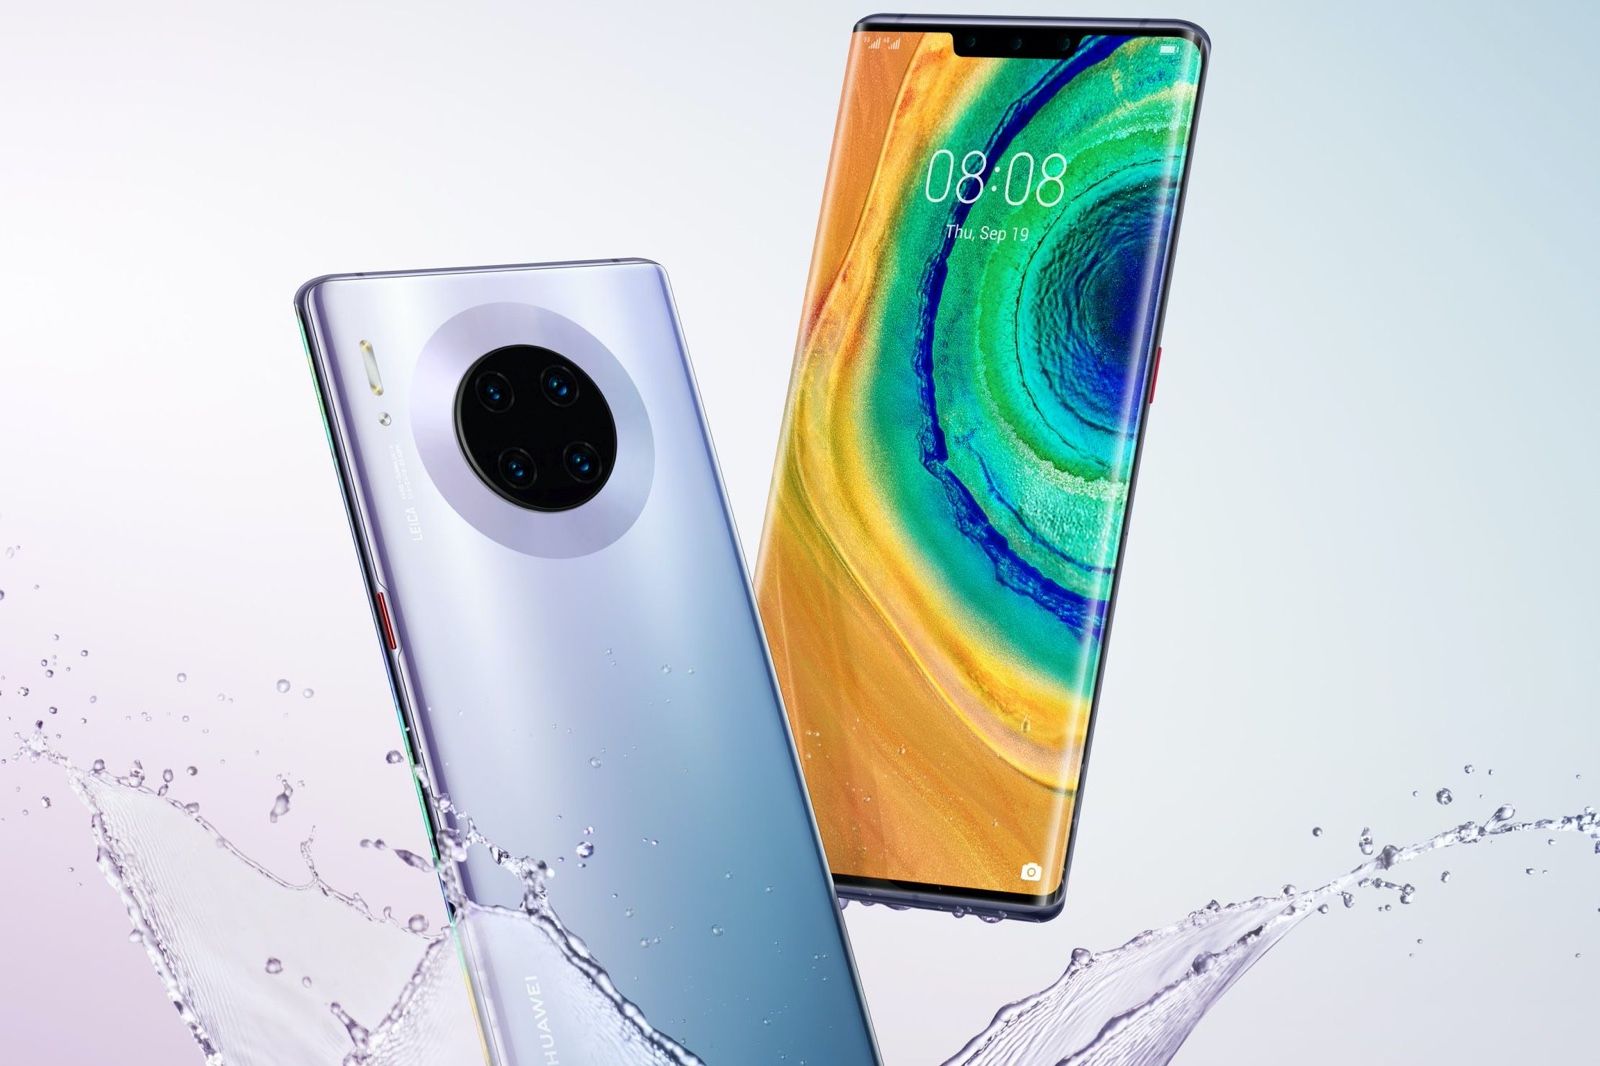 Huawei Announces The Mate 30 Series Including The Mate 30 Pro image 1